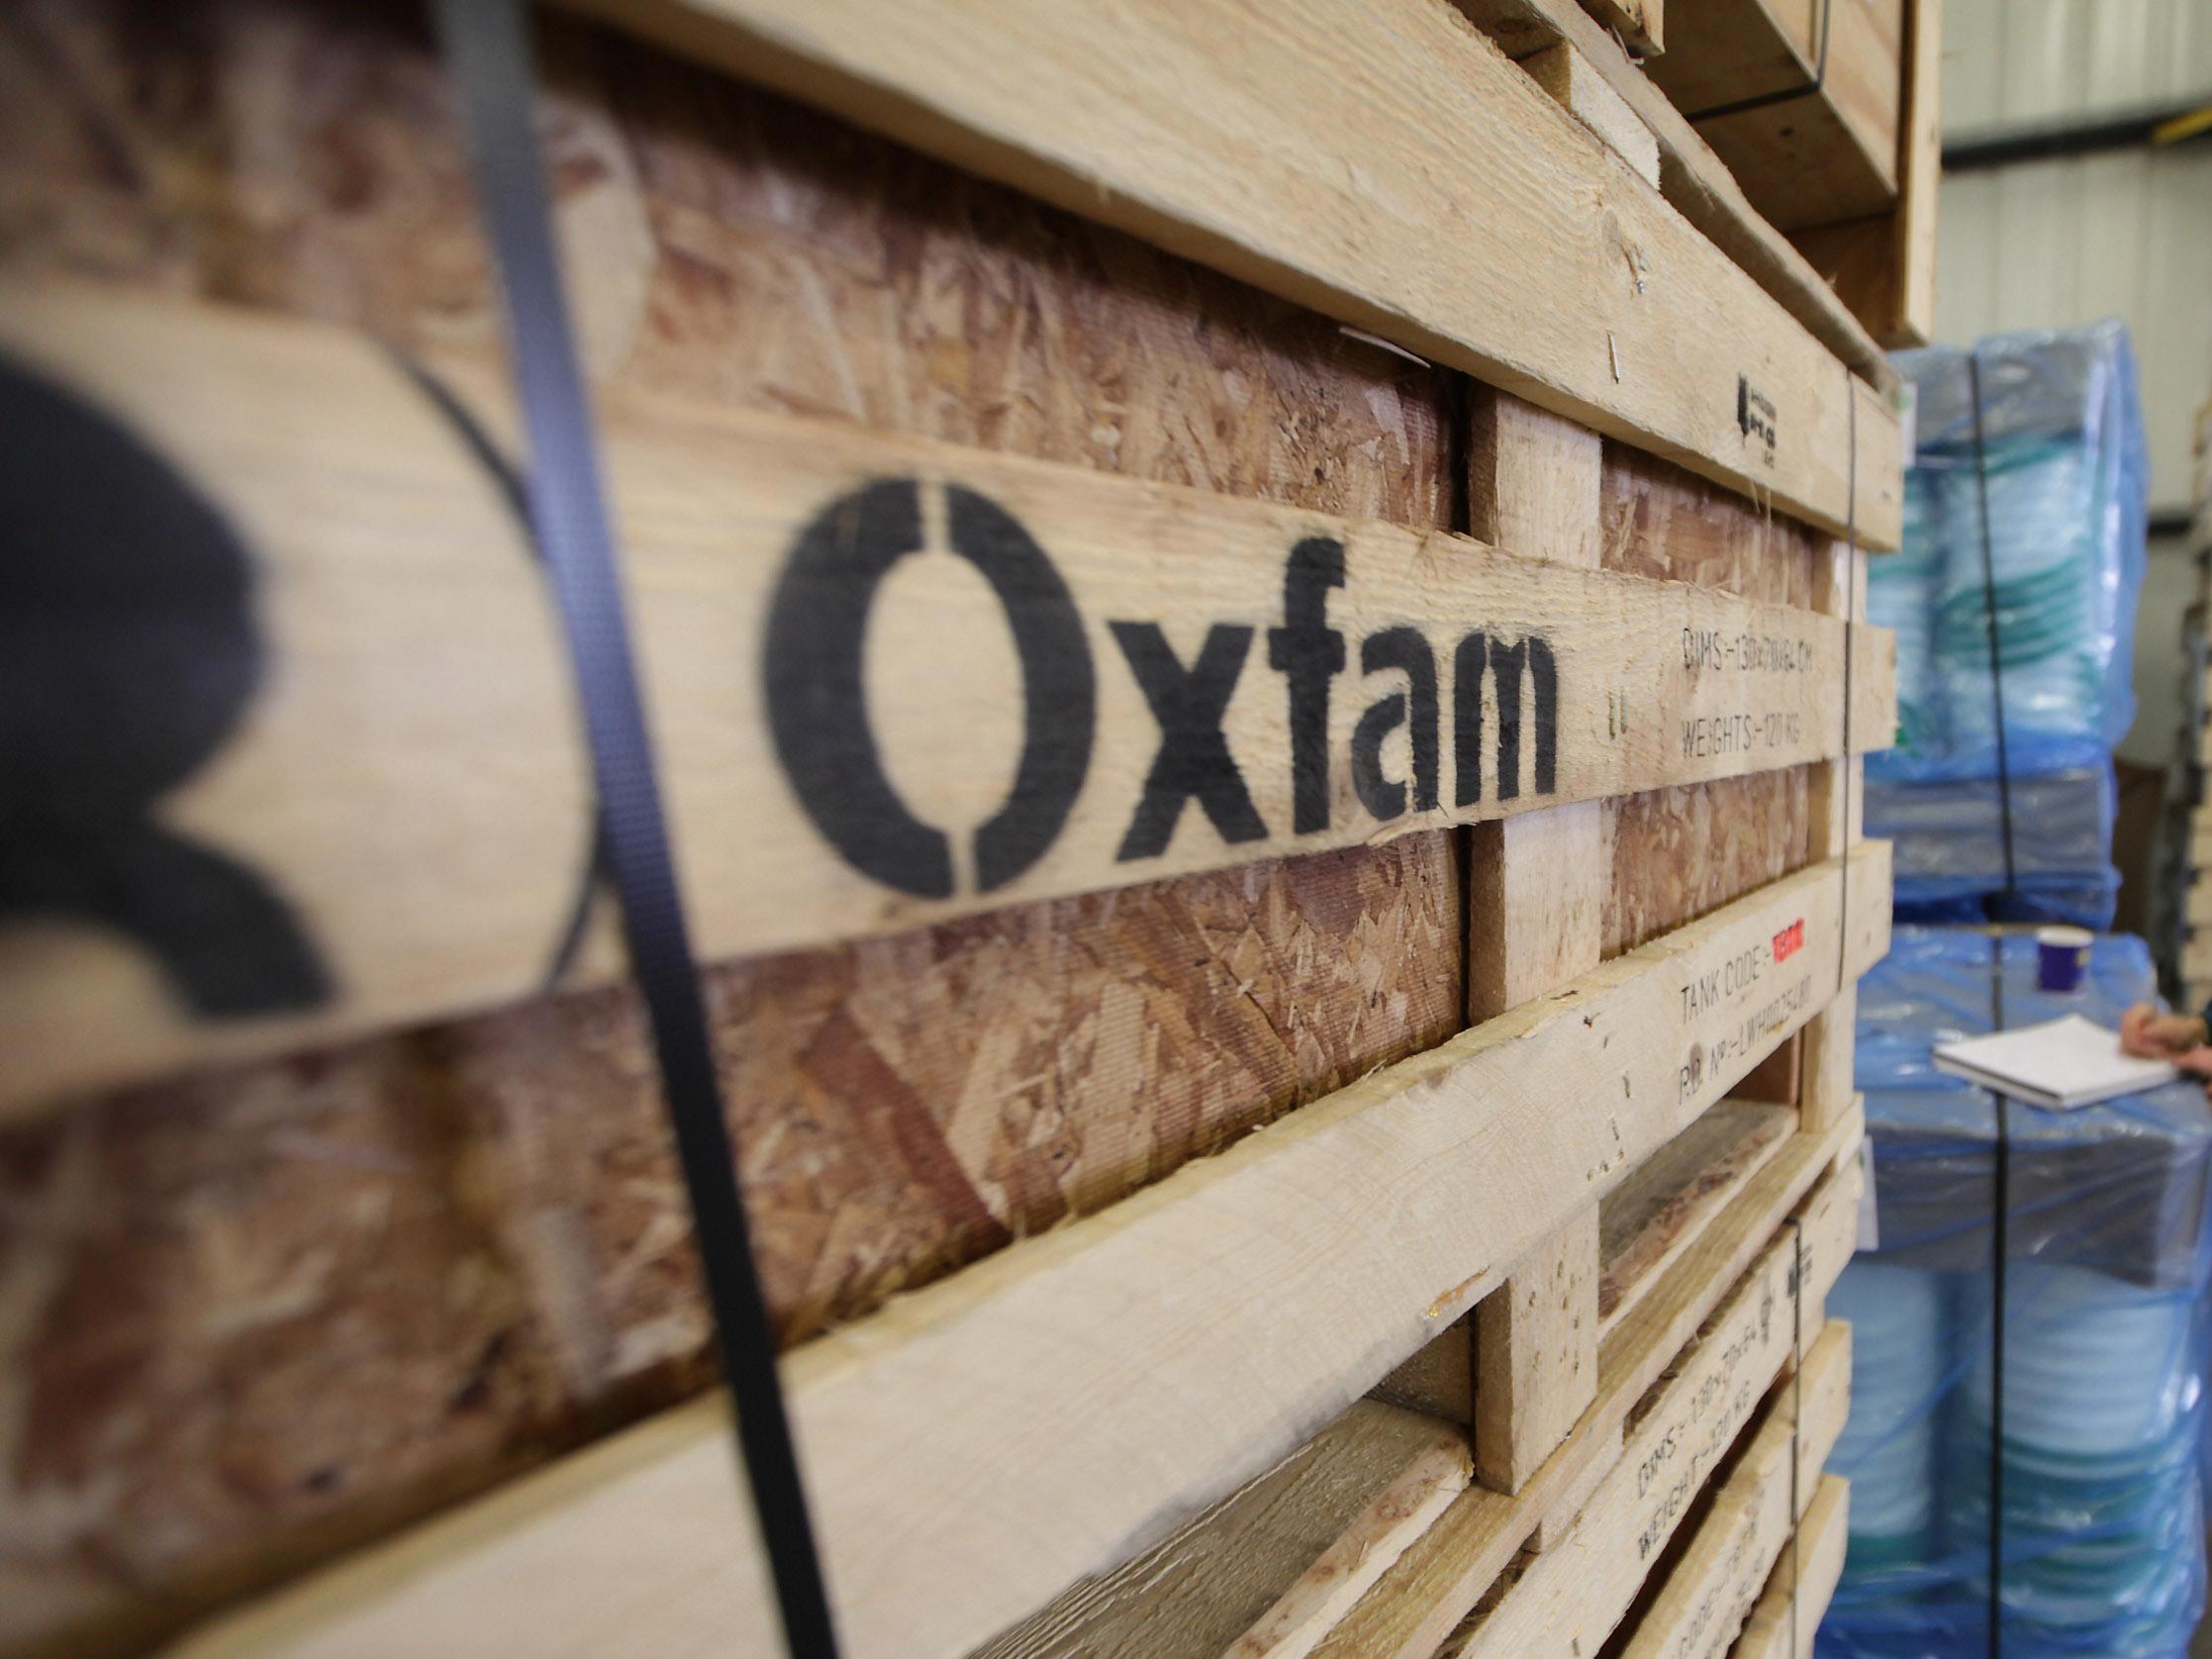 Aid sector was rocked by revelation in 2018 that Oxfam workers in Haiti had sexually exploited young women